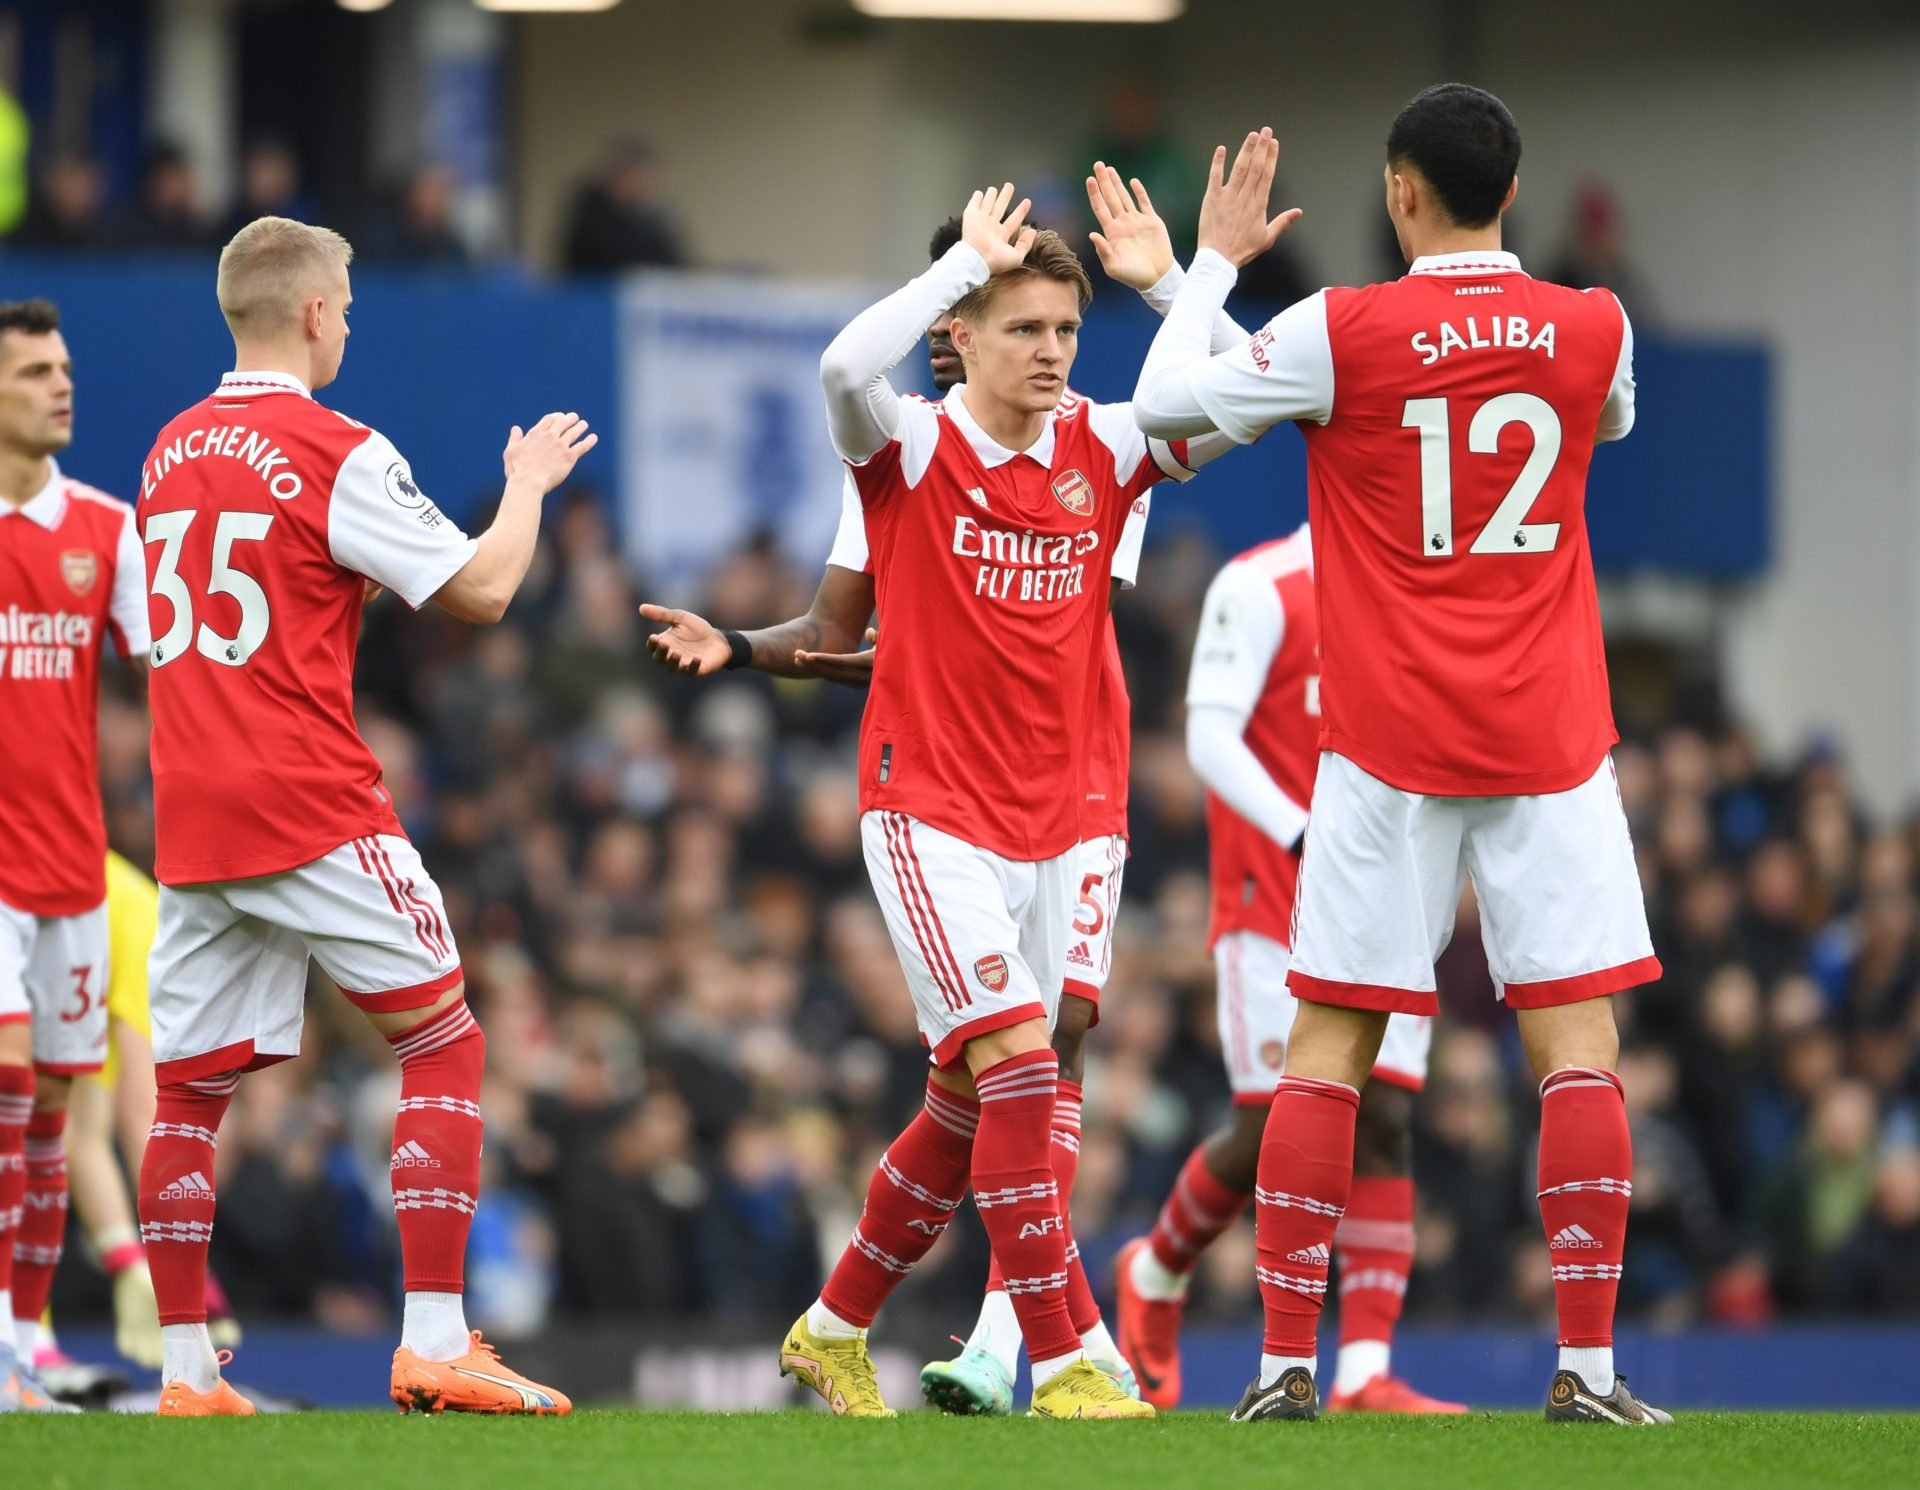 Arsenal stay top of the Premier League with dominant display against Leicester - cover